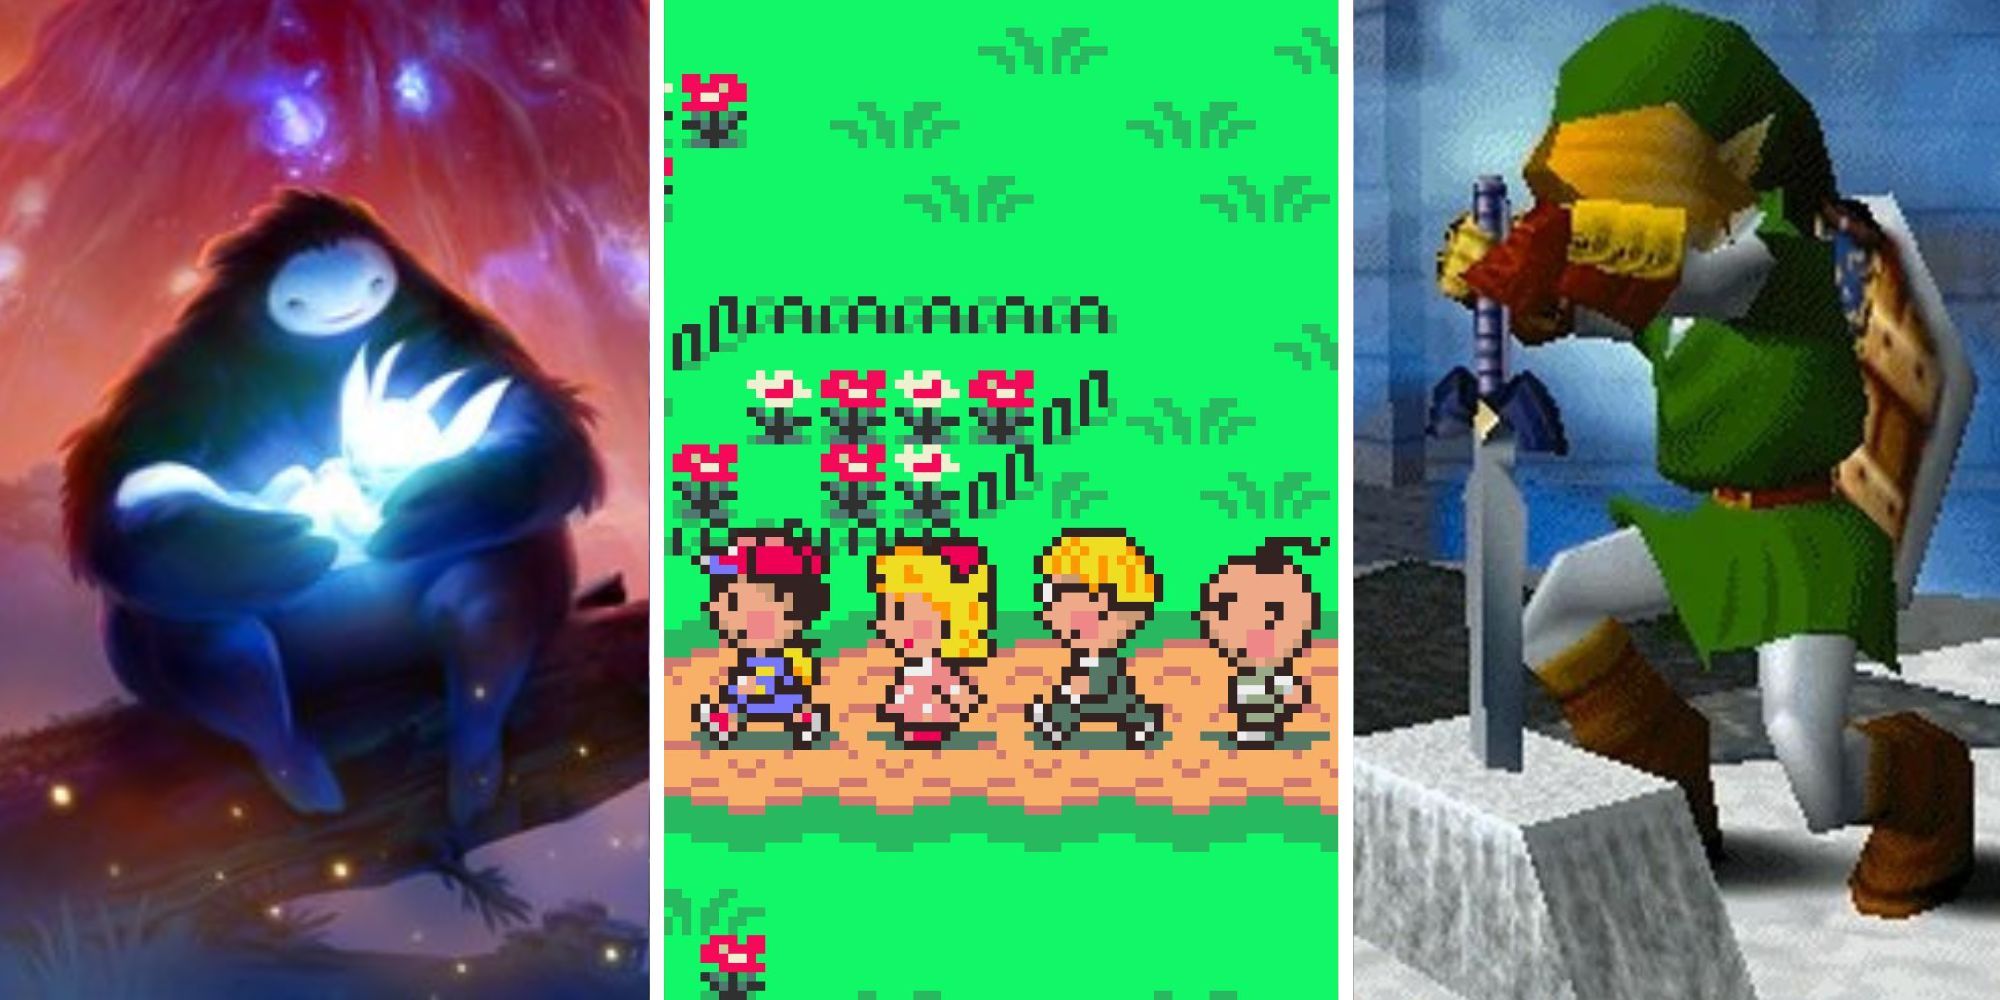 Split image of Ori and the Blind Forest, Earthbound, and The Legend of Zelda.